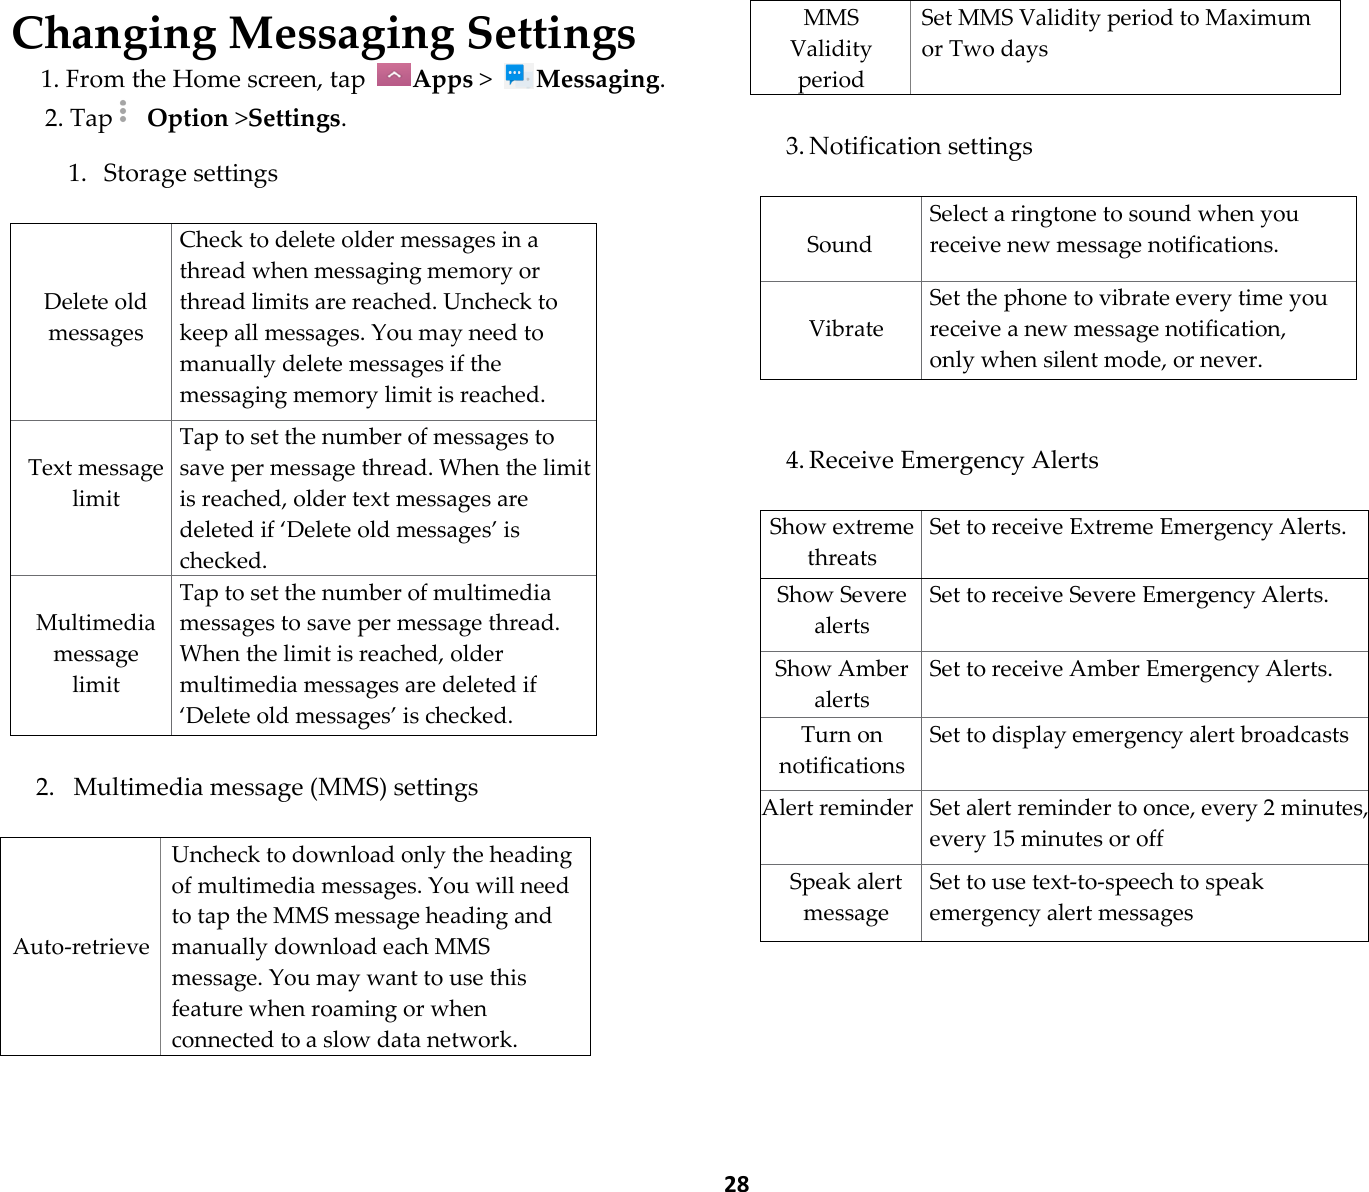  28 Changing Messaging Settings 1. From the Home screen, tap  Apps &gt;  Messaging. 2. Tap   Option &gt;Settings.  1.   Storage settings      Delete old messages Check to delete older messages in a thread when messaging memory or thread limits are reached. Uncheck to keep all messages. You may need to manually delete messages if the messaging memory limit is reached.  Text message limit Tap to set the number of messages to save per message thread. When the limit is reached, older text messages are deleted if ‘Delete old messages’ is checked.  Multimedia message limit Tap to set the number of multimedia messages to save per message thread. When the limit is reached, older multimedia messages are deleted if ‘Delete old messages’ is checked.  2. Multimedia message (MMS) settings     Auto-retrieve Uncheck to download only the heading of multimedia messages. You will need to tap the MMS message heading and manually download each MMS message. You may want to use this feature when roaming or when connected to a slow data network. MMS Validity period Set MMS Validity period to Maximum or Two days  3. Notification settings   Sound Select a ringtone to sound when you receive new message notifications.  Vibrate Set the phone to vibrate every time you receive a new message notification, only when silent mode, or never.  4. Receive Emergency Alerts  Show extreme threats Set to receive Extreme Emergency Alerts. Show Severe alerts Set to receive Severe Emergency Alerts. Show Amber alerts Set to receive Amber Emergency Alerts. Turn on notifications Set to display emergency alert broadcasts Alert reminder Set alert reminder to once, every 2 minutes, every 15 minutes or off Speak alert message Set to use text-to-speech to speak emergency alert messages  